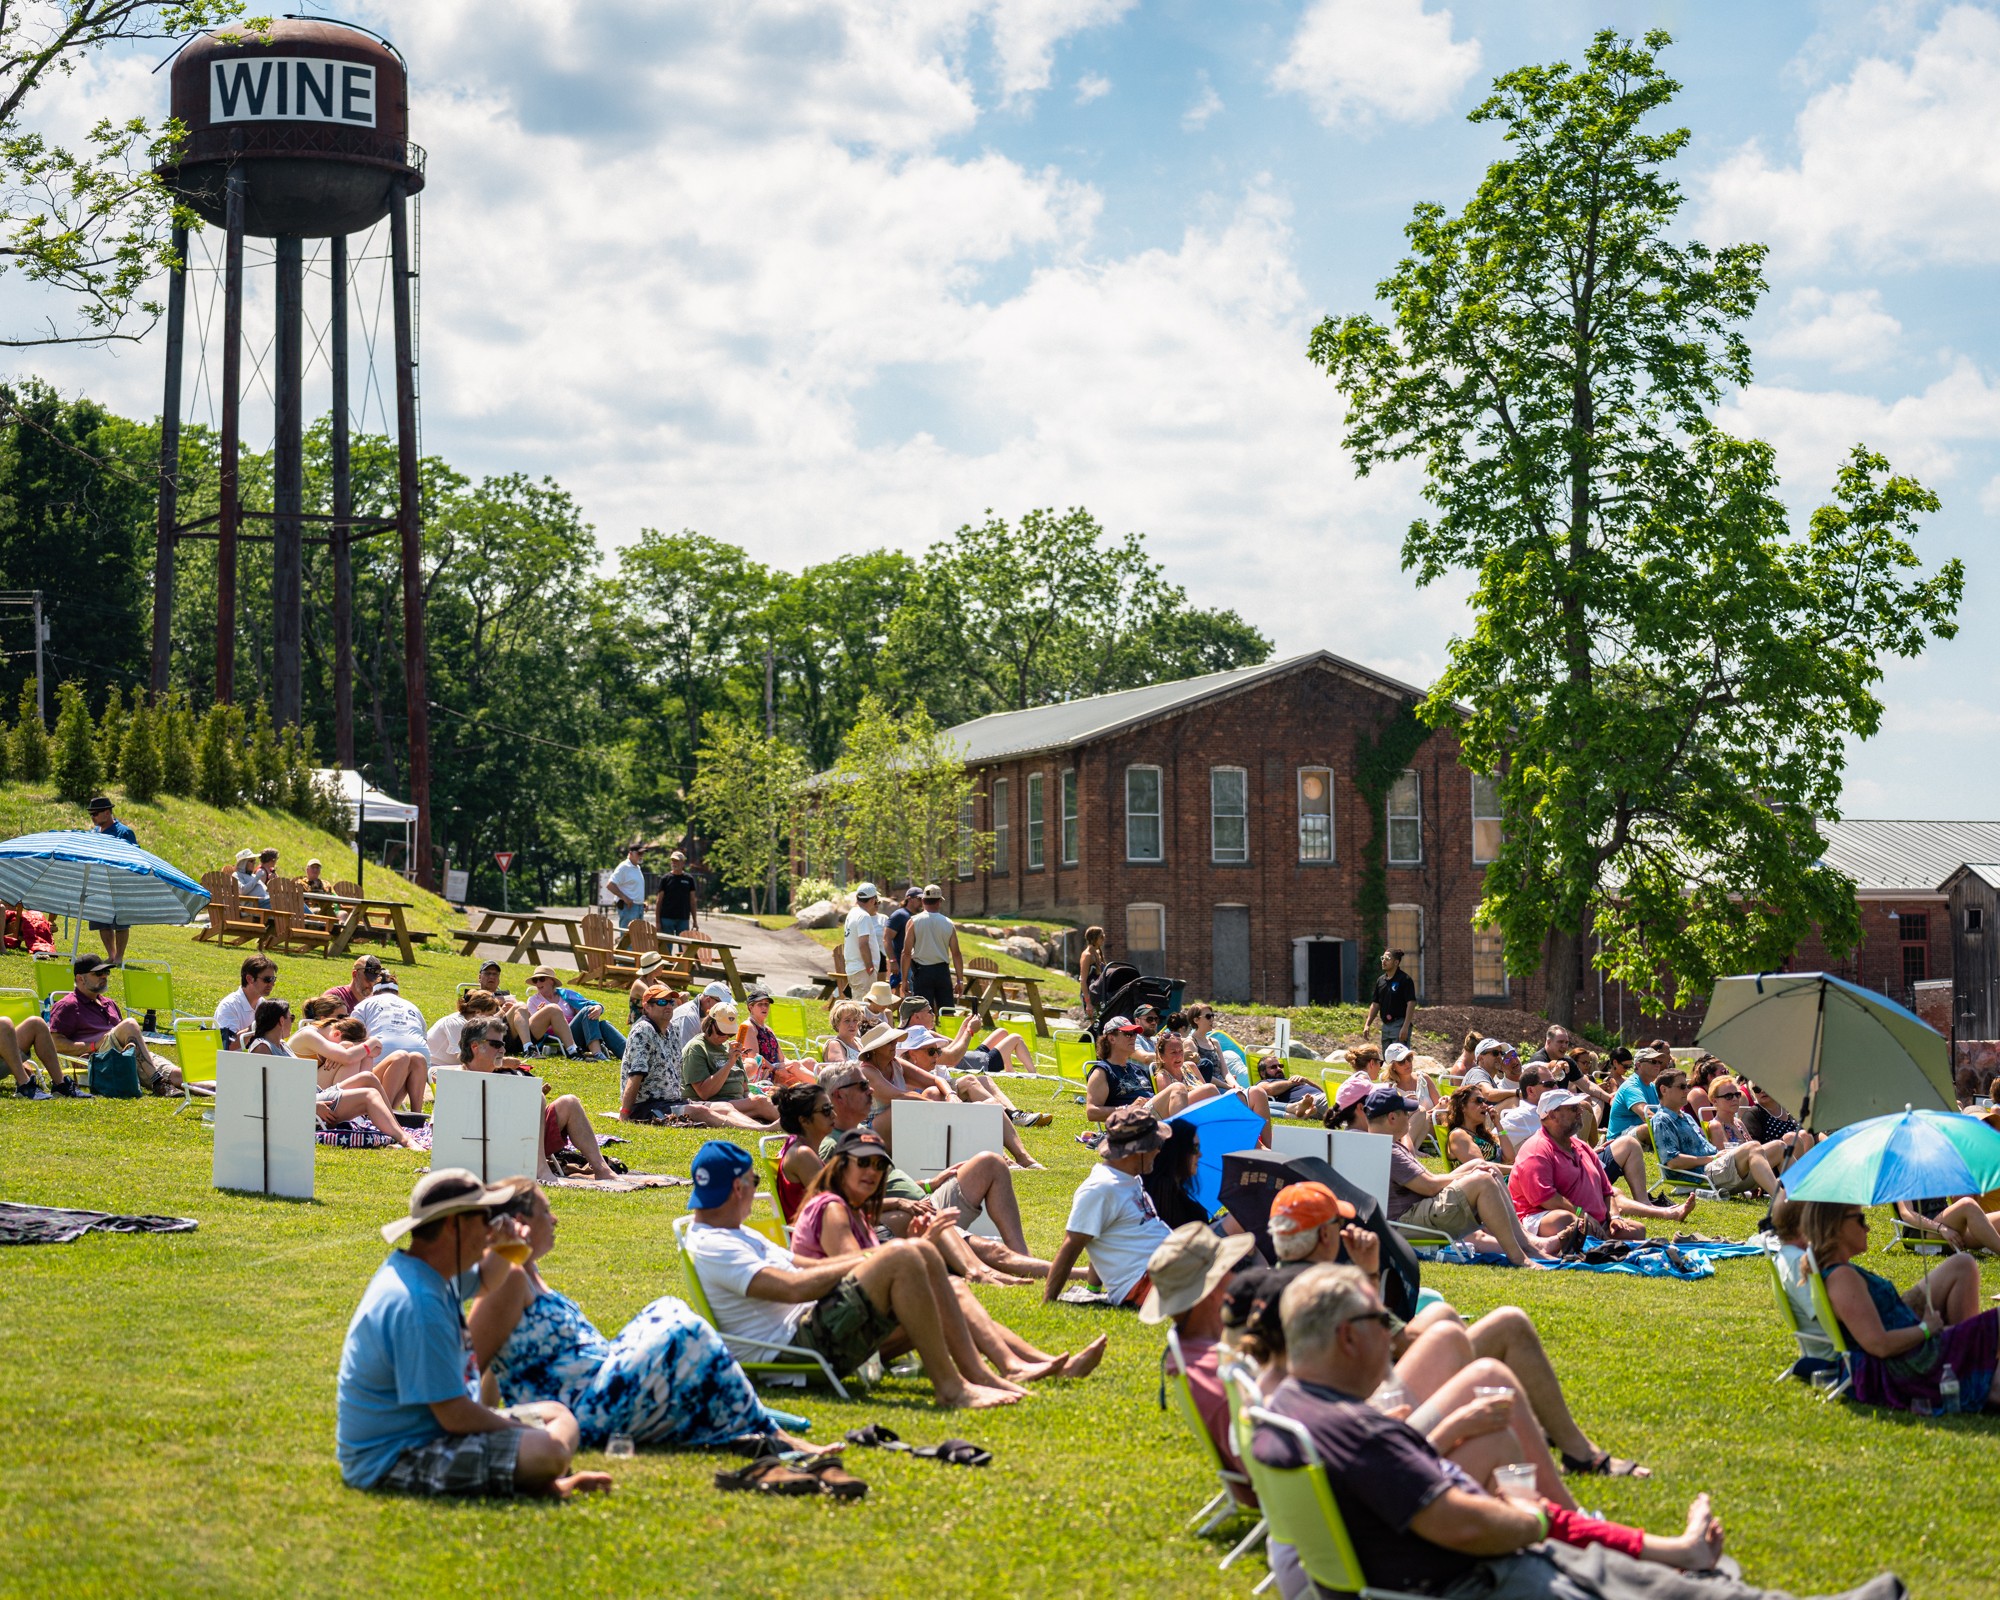 City Winery Hudson Valley Offers A Summer Filled With Great Music Eats And Of Course Wine Sponsored General Arts Culture Hudson Valley Chronogram Magazine